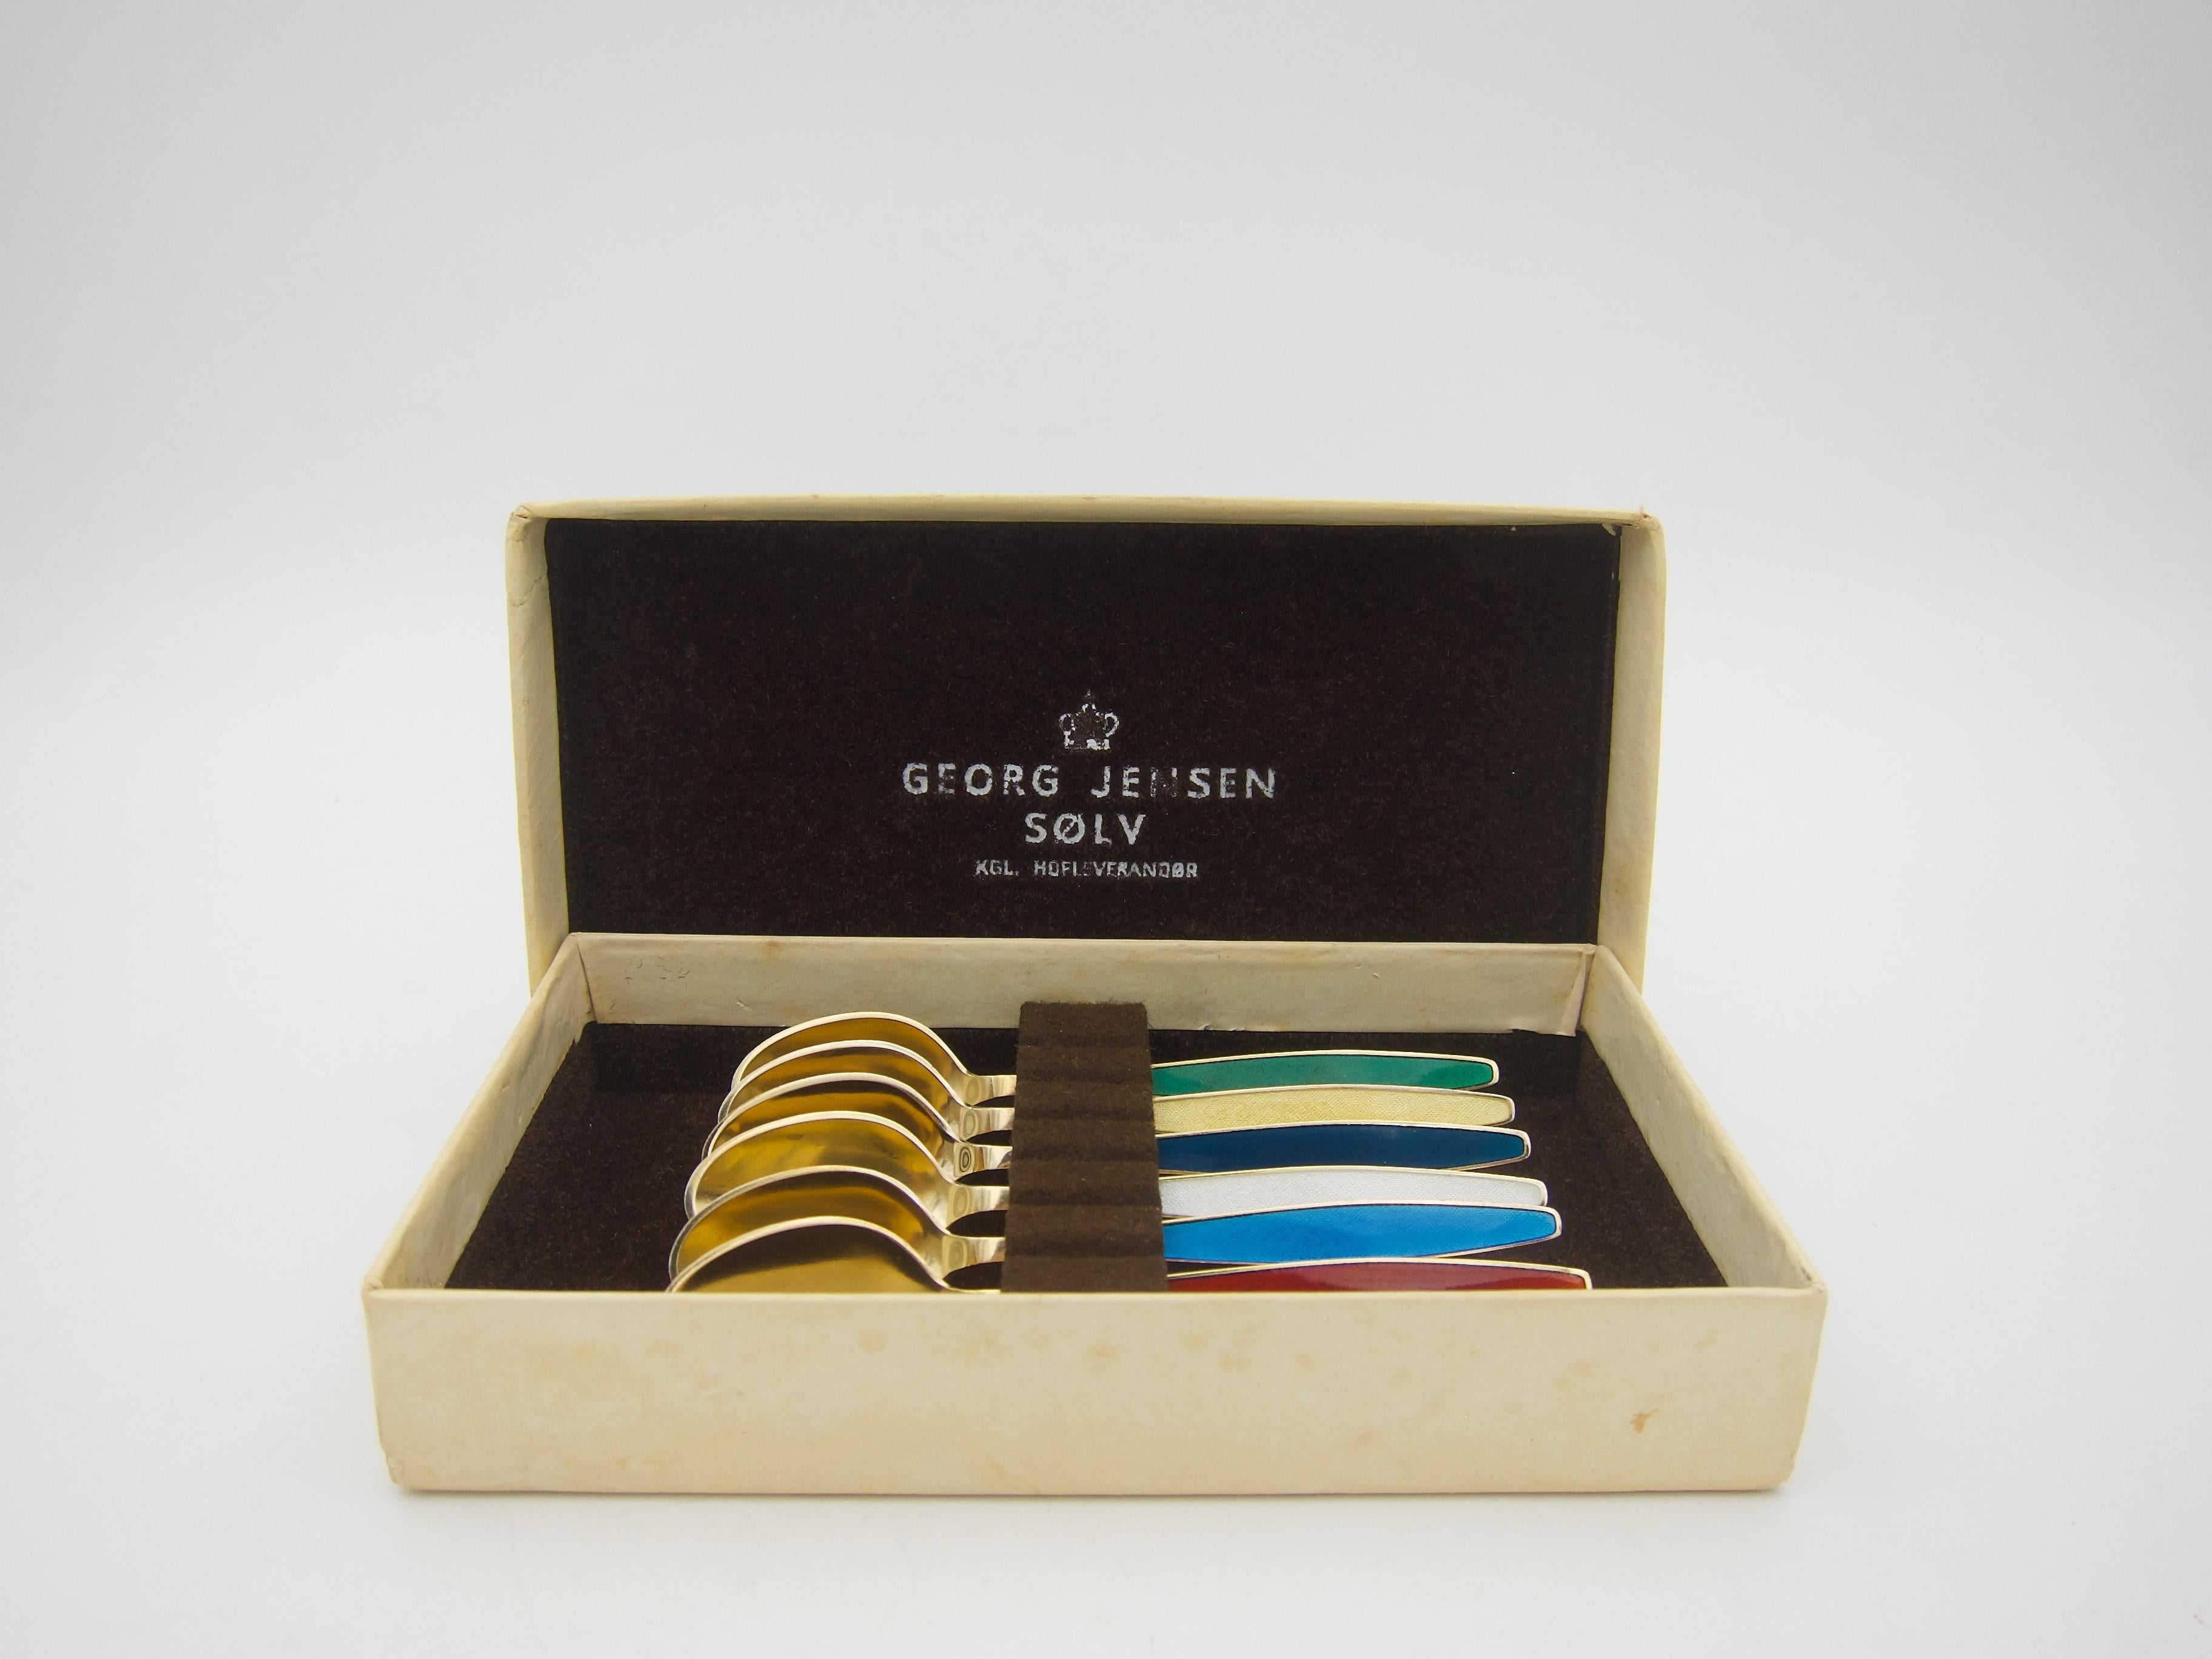 A vintage boxed set of six sterling silver gilt and enamel spoons from Georg Jensen, founded in Copenhagen, Denmark in 1904. Each solid silver spoon has a gold wash surface with a field of jewel toned enamel ornamenting the handles. The spoons date